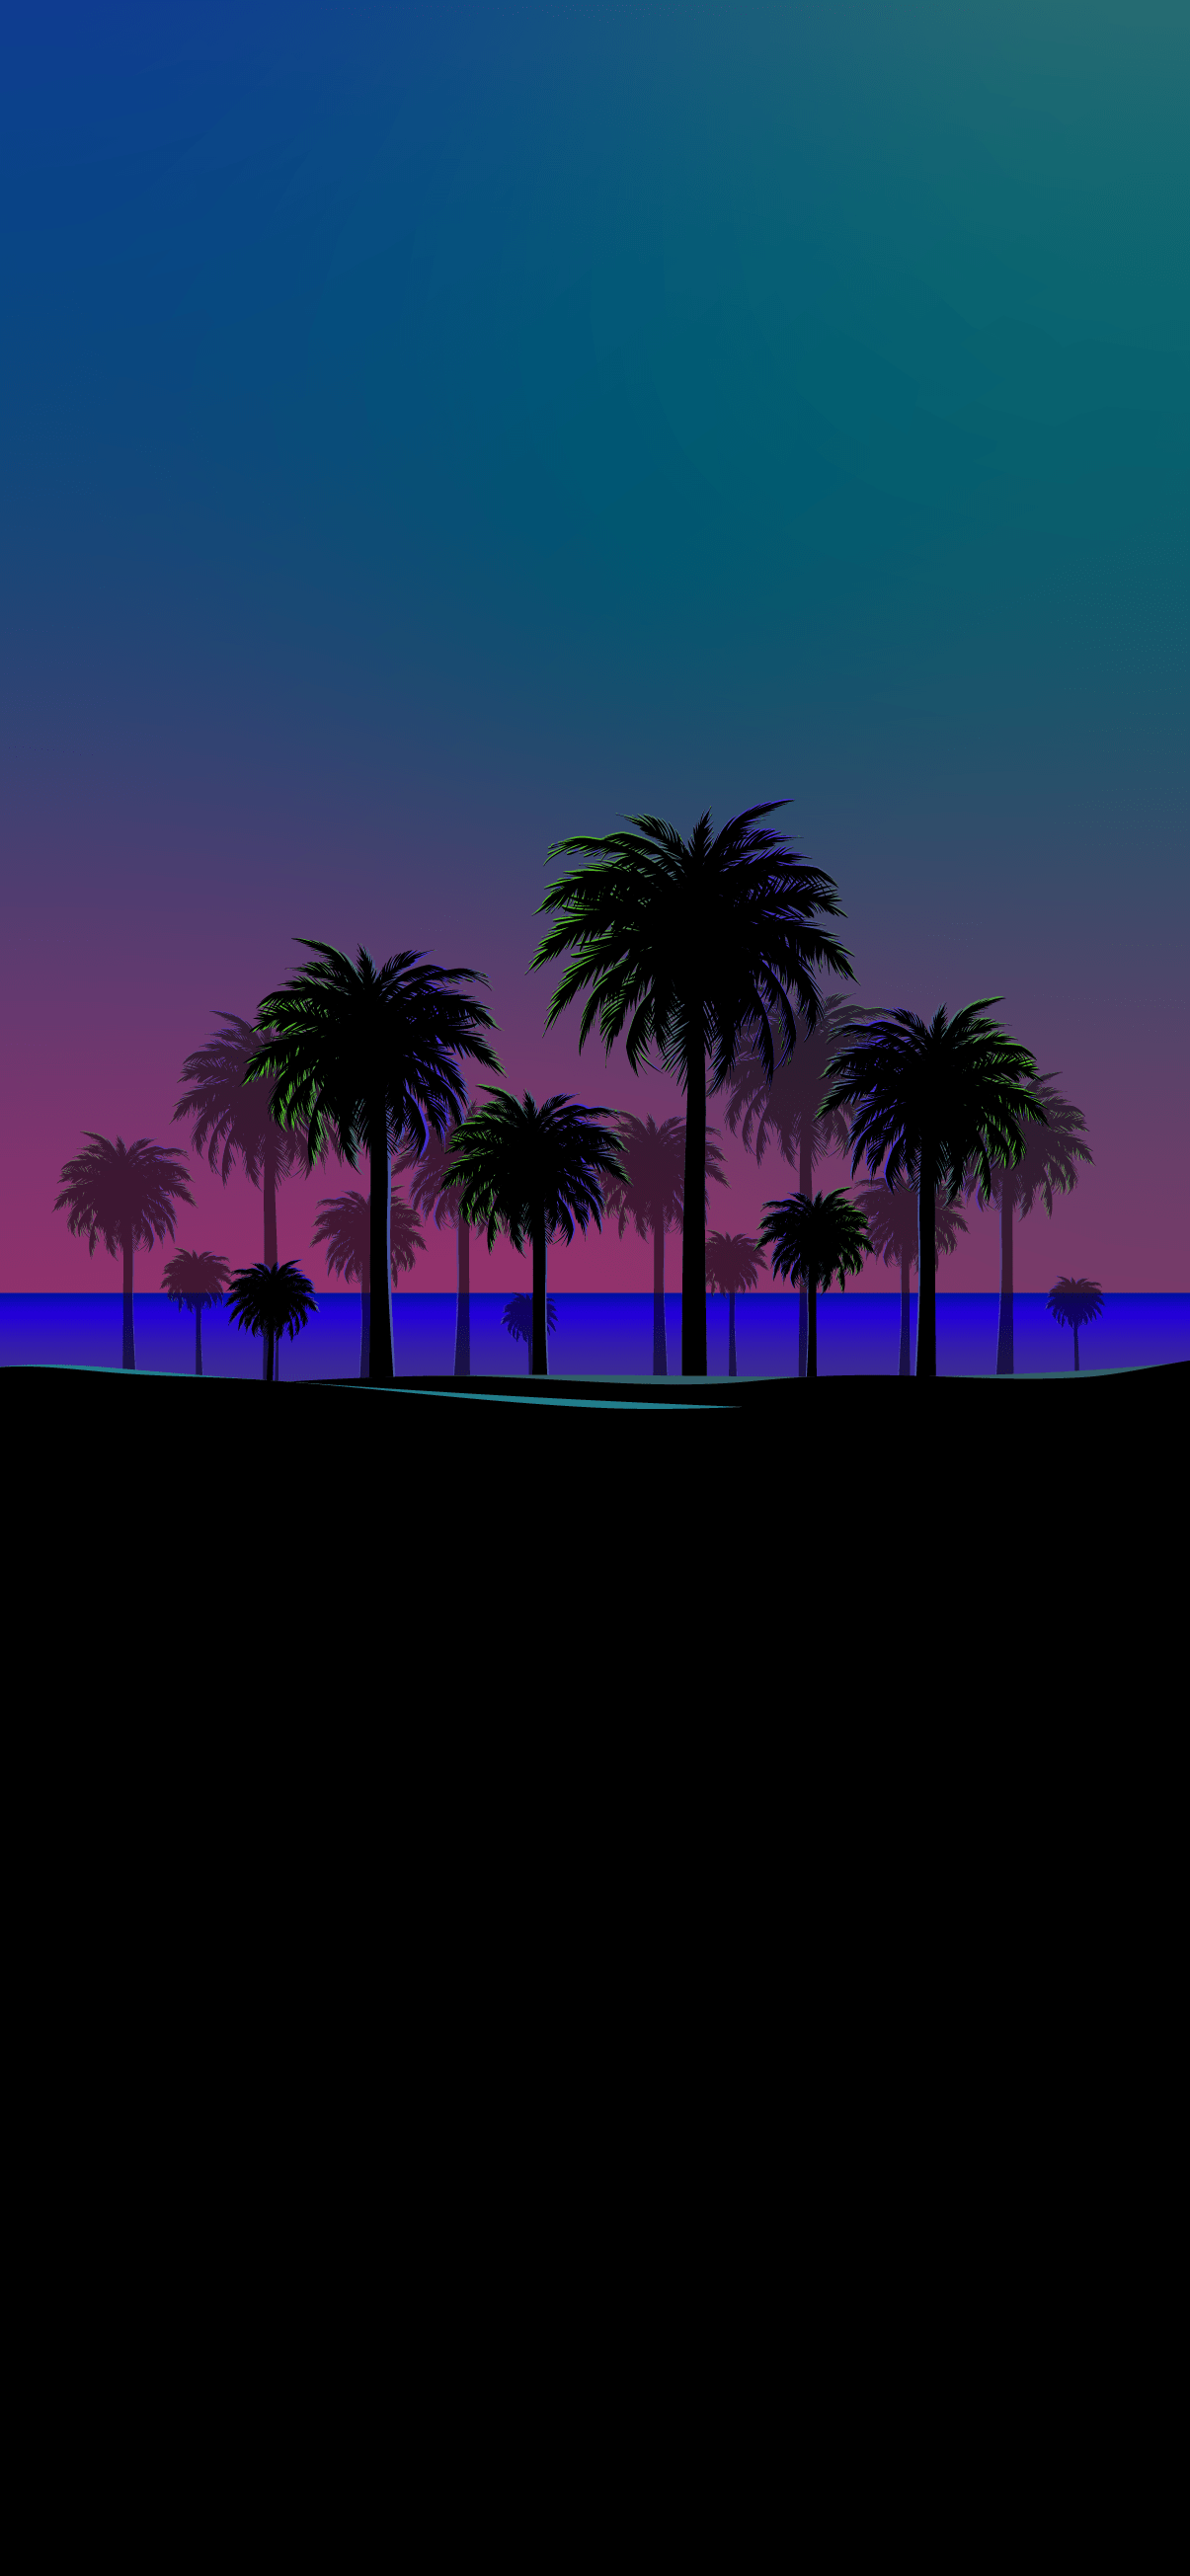 A silhouette of palm trees on a purple and blue gradient background. - IPhone, cool, couple, HD